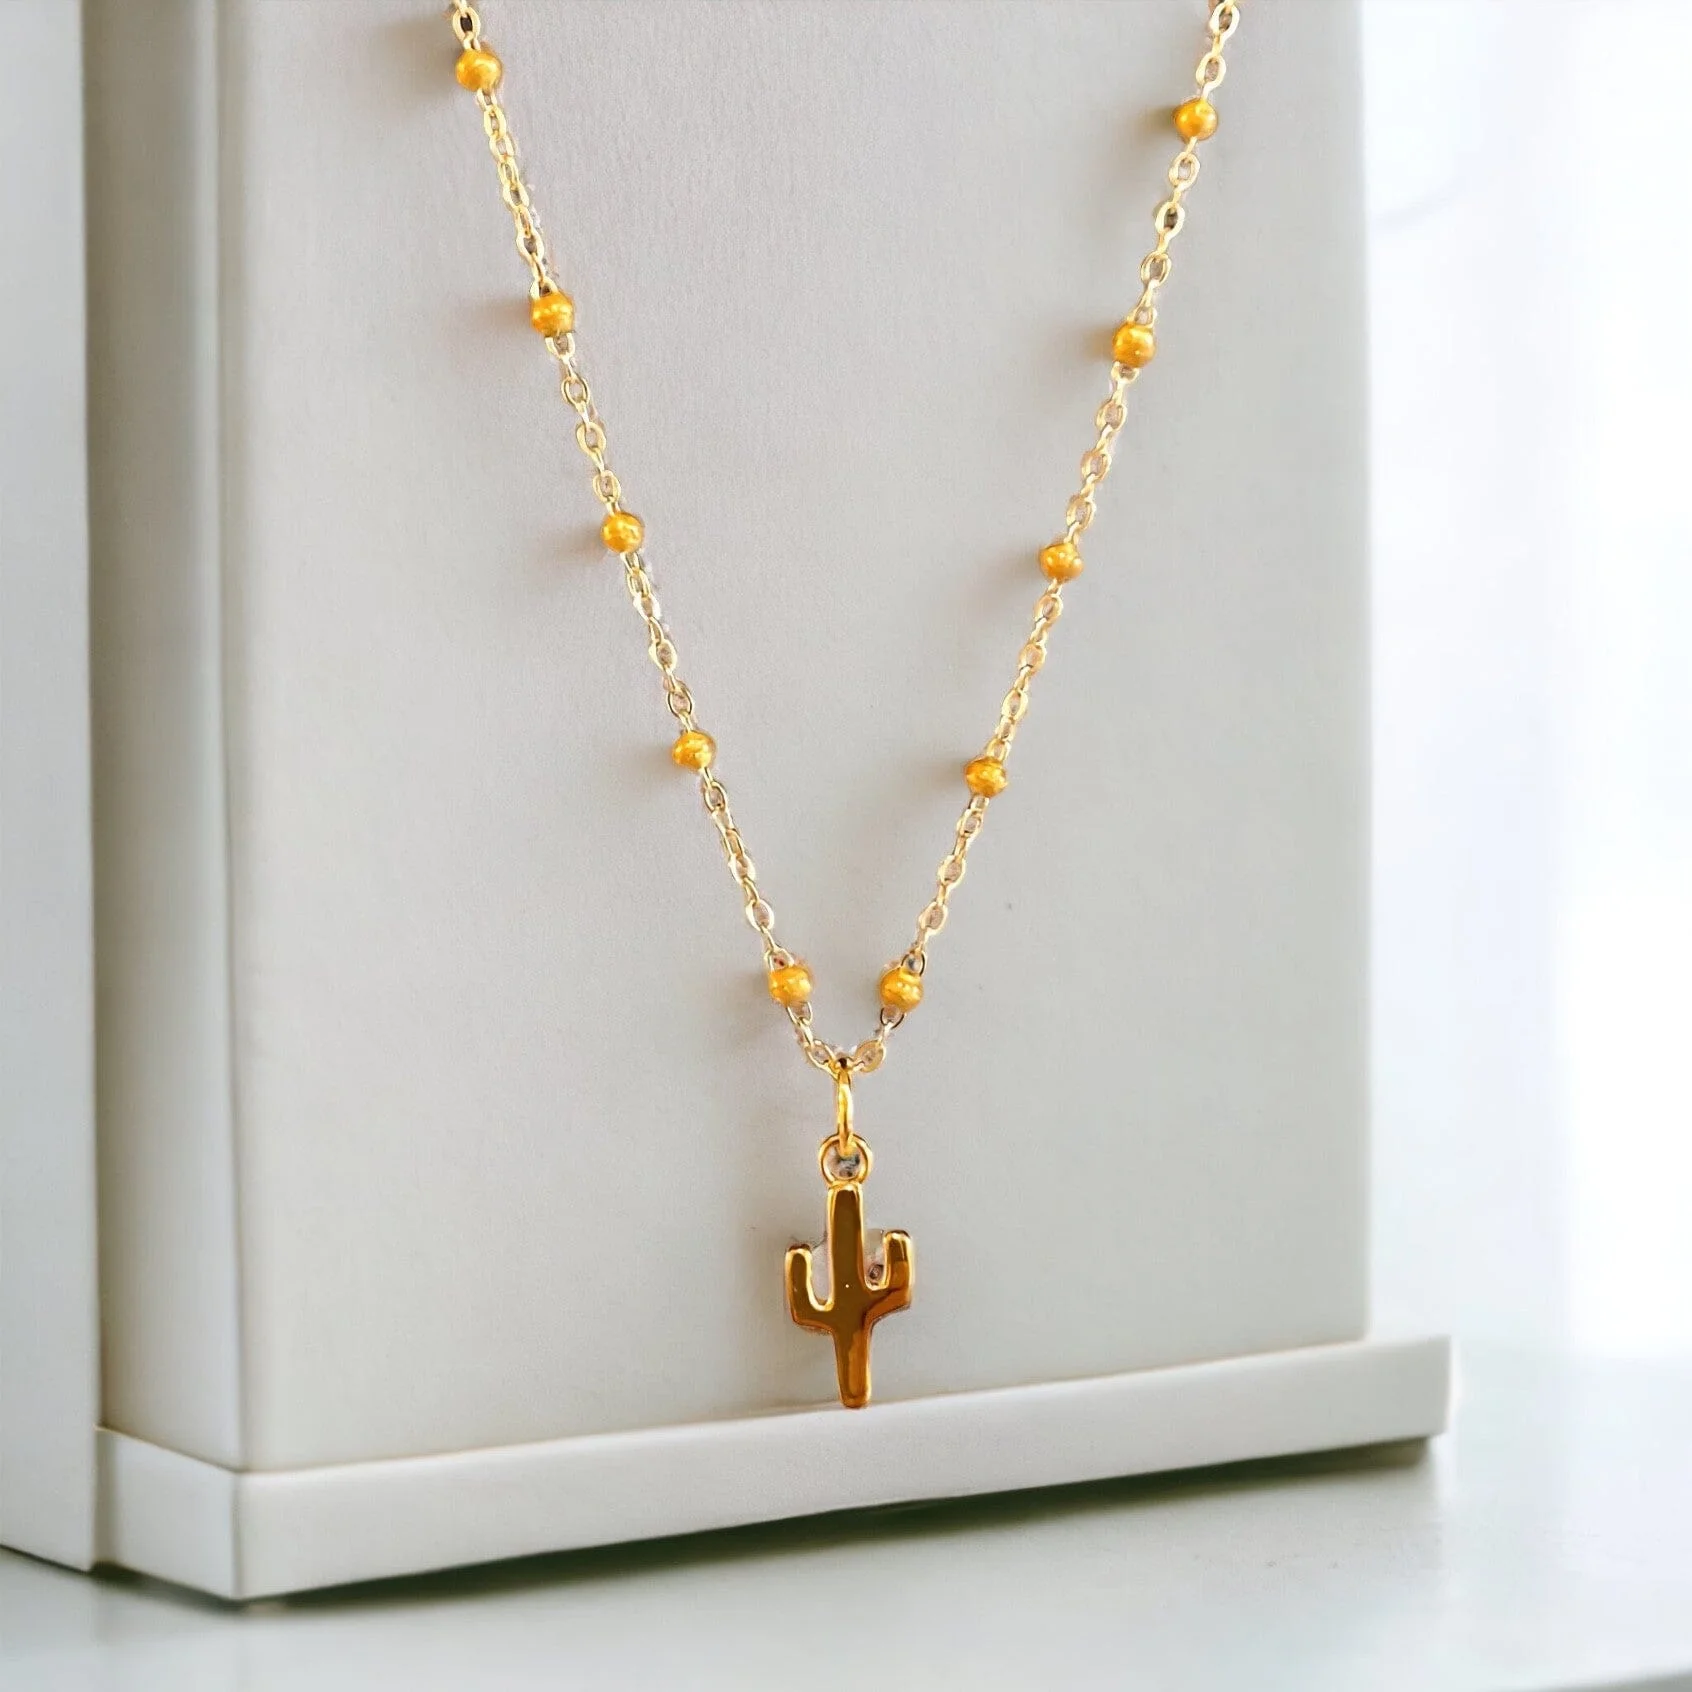 Reveal Elegance: The Allure of Gold Cactus Necklaces